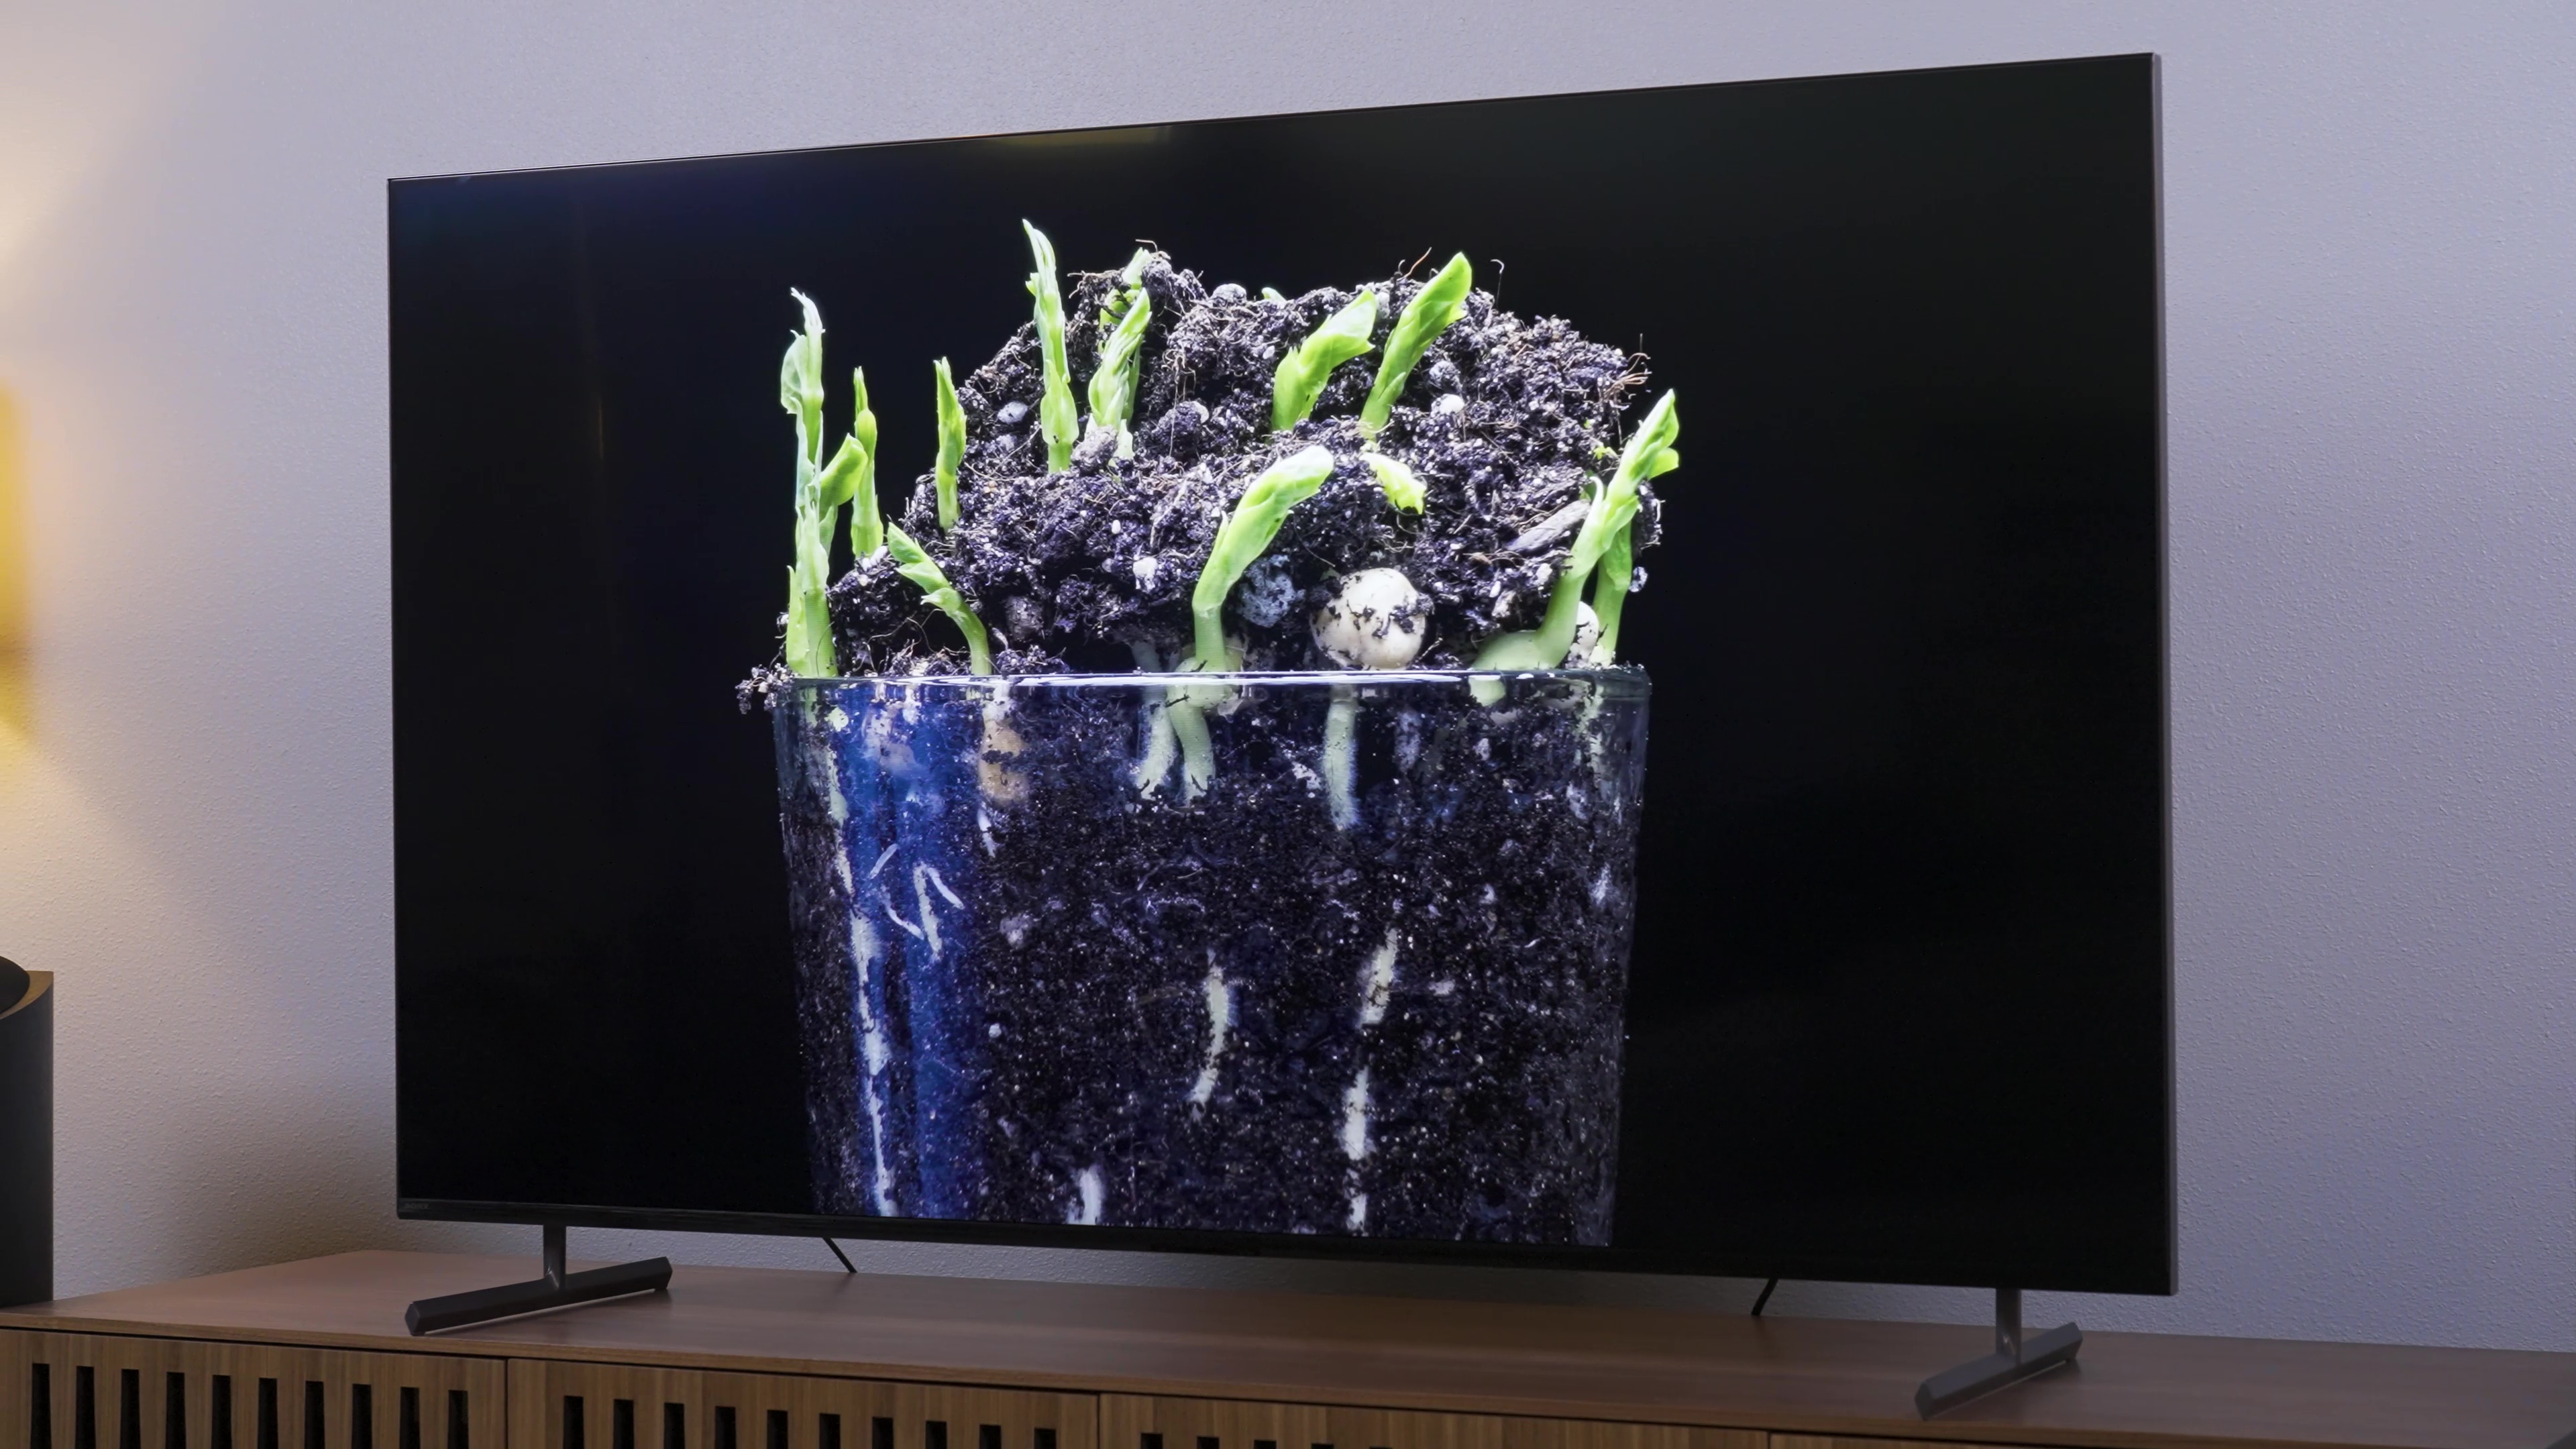 Green plant shoots push up through dirt in a clear vessel seen on a Sony X90L.